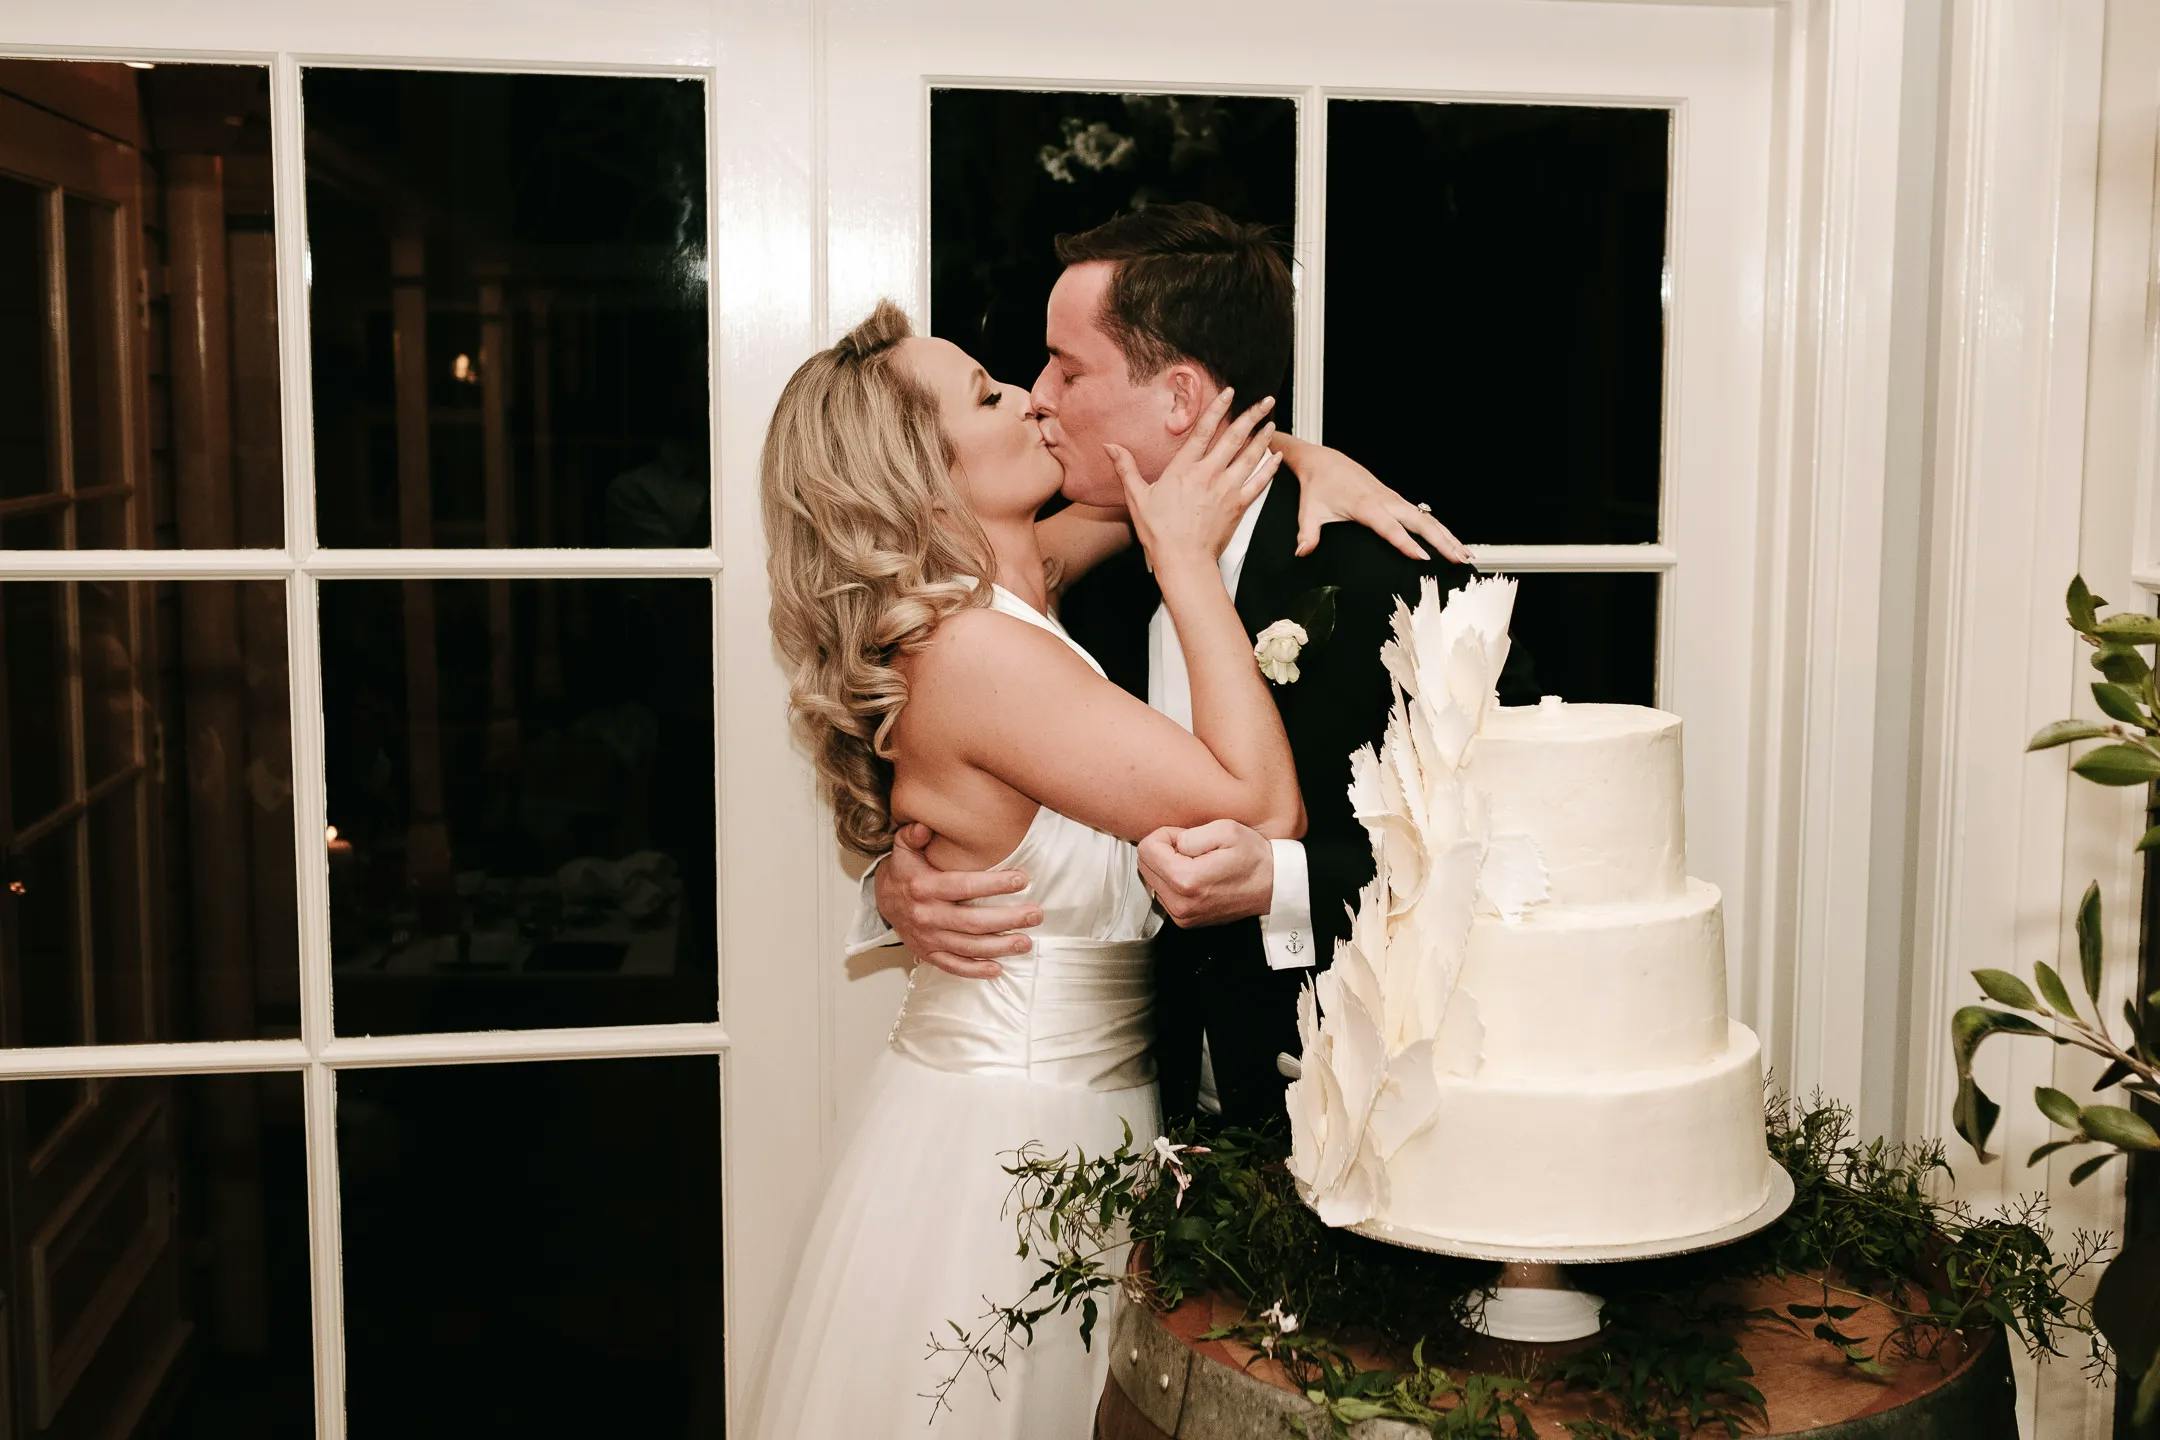 A newlywed couple shares a kiss while embracing next to a three-tiered white wedding cake adorned with leaf-like decorations. They are standing in front of large glass windows in a warmly lit room. The bride is in a strapless white dress, and the groom is in a dark suit.